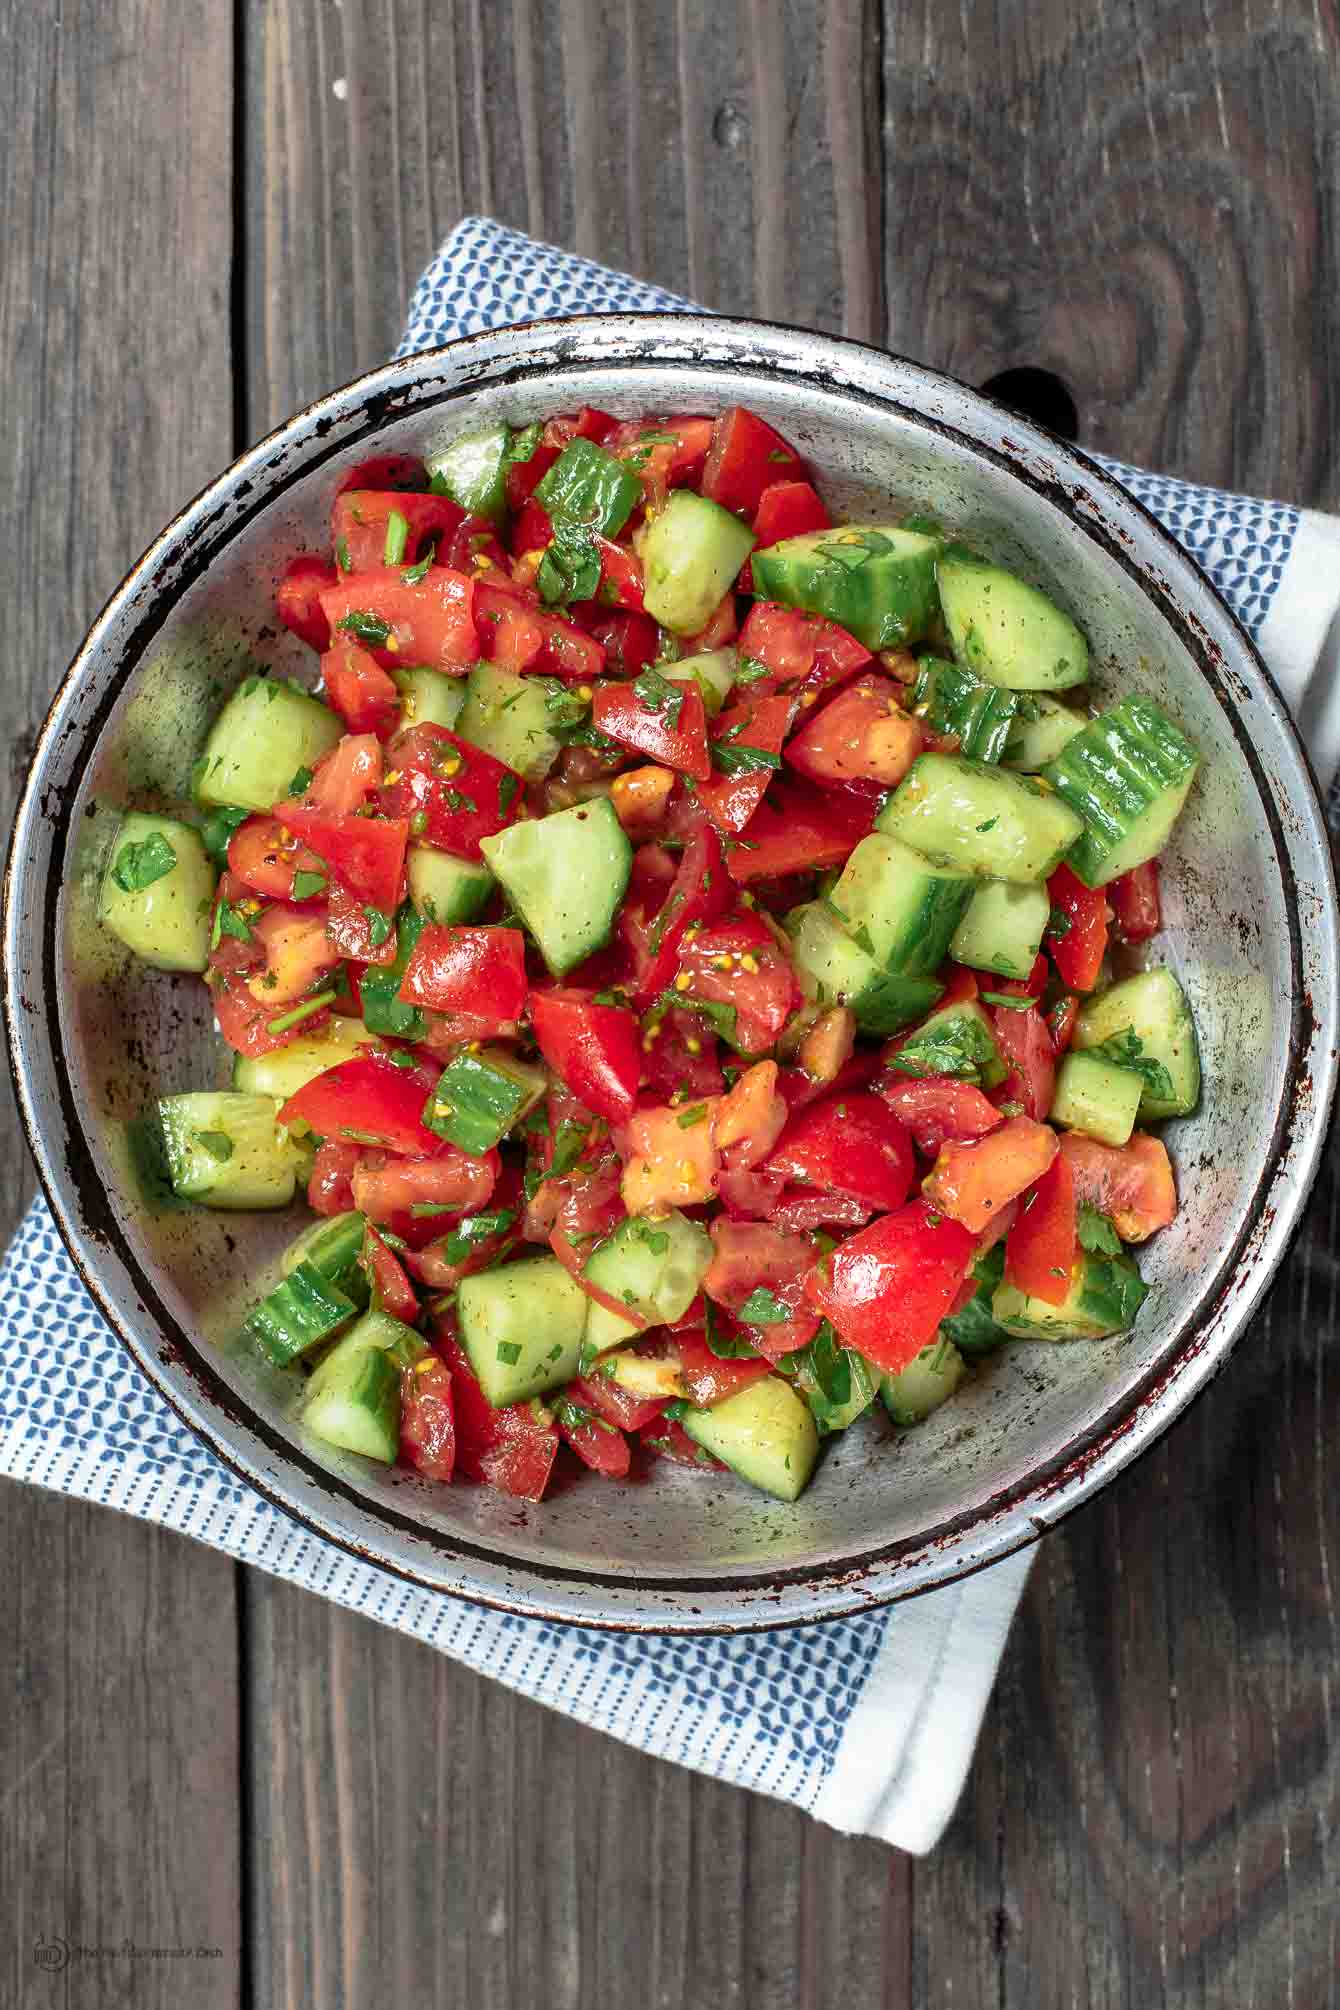 Mediterranean salad with tomatoes, cucumbers, and parsley in a bowl